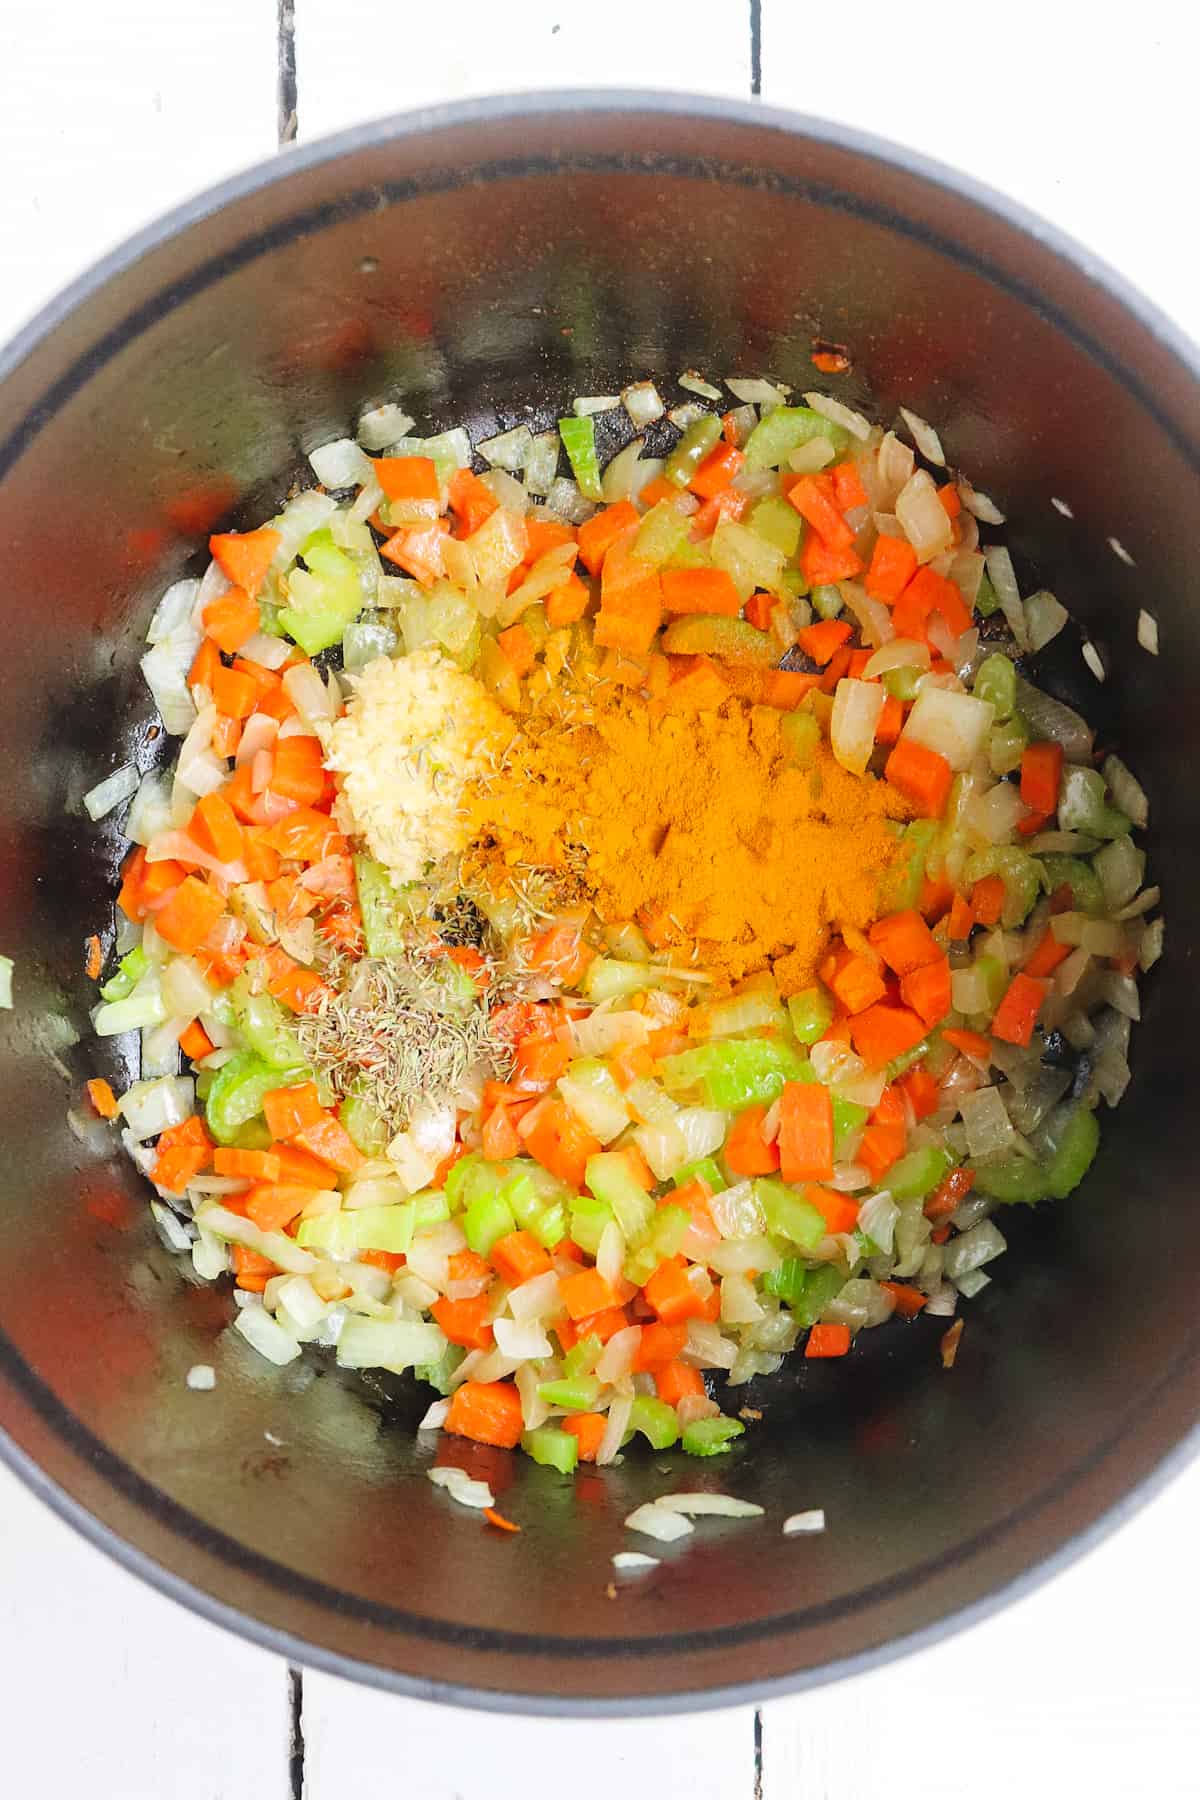 turmeric and mirepoix in soup pot.